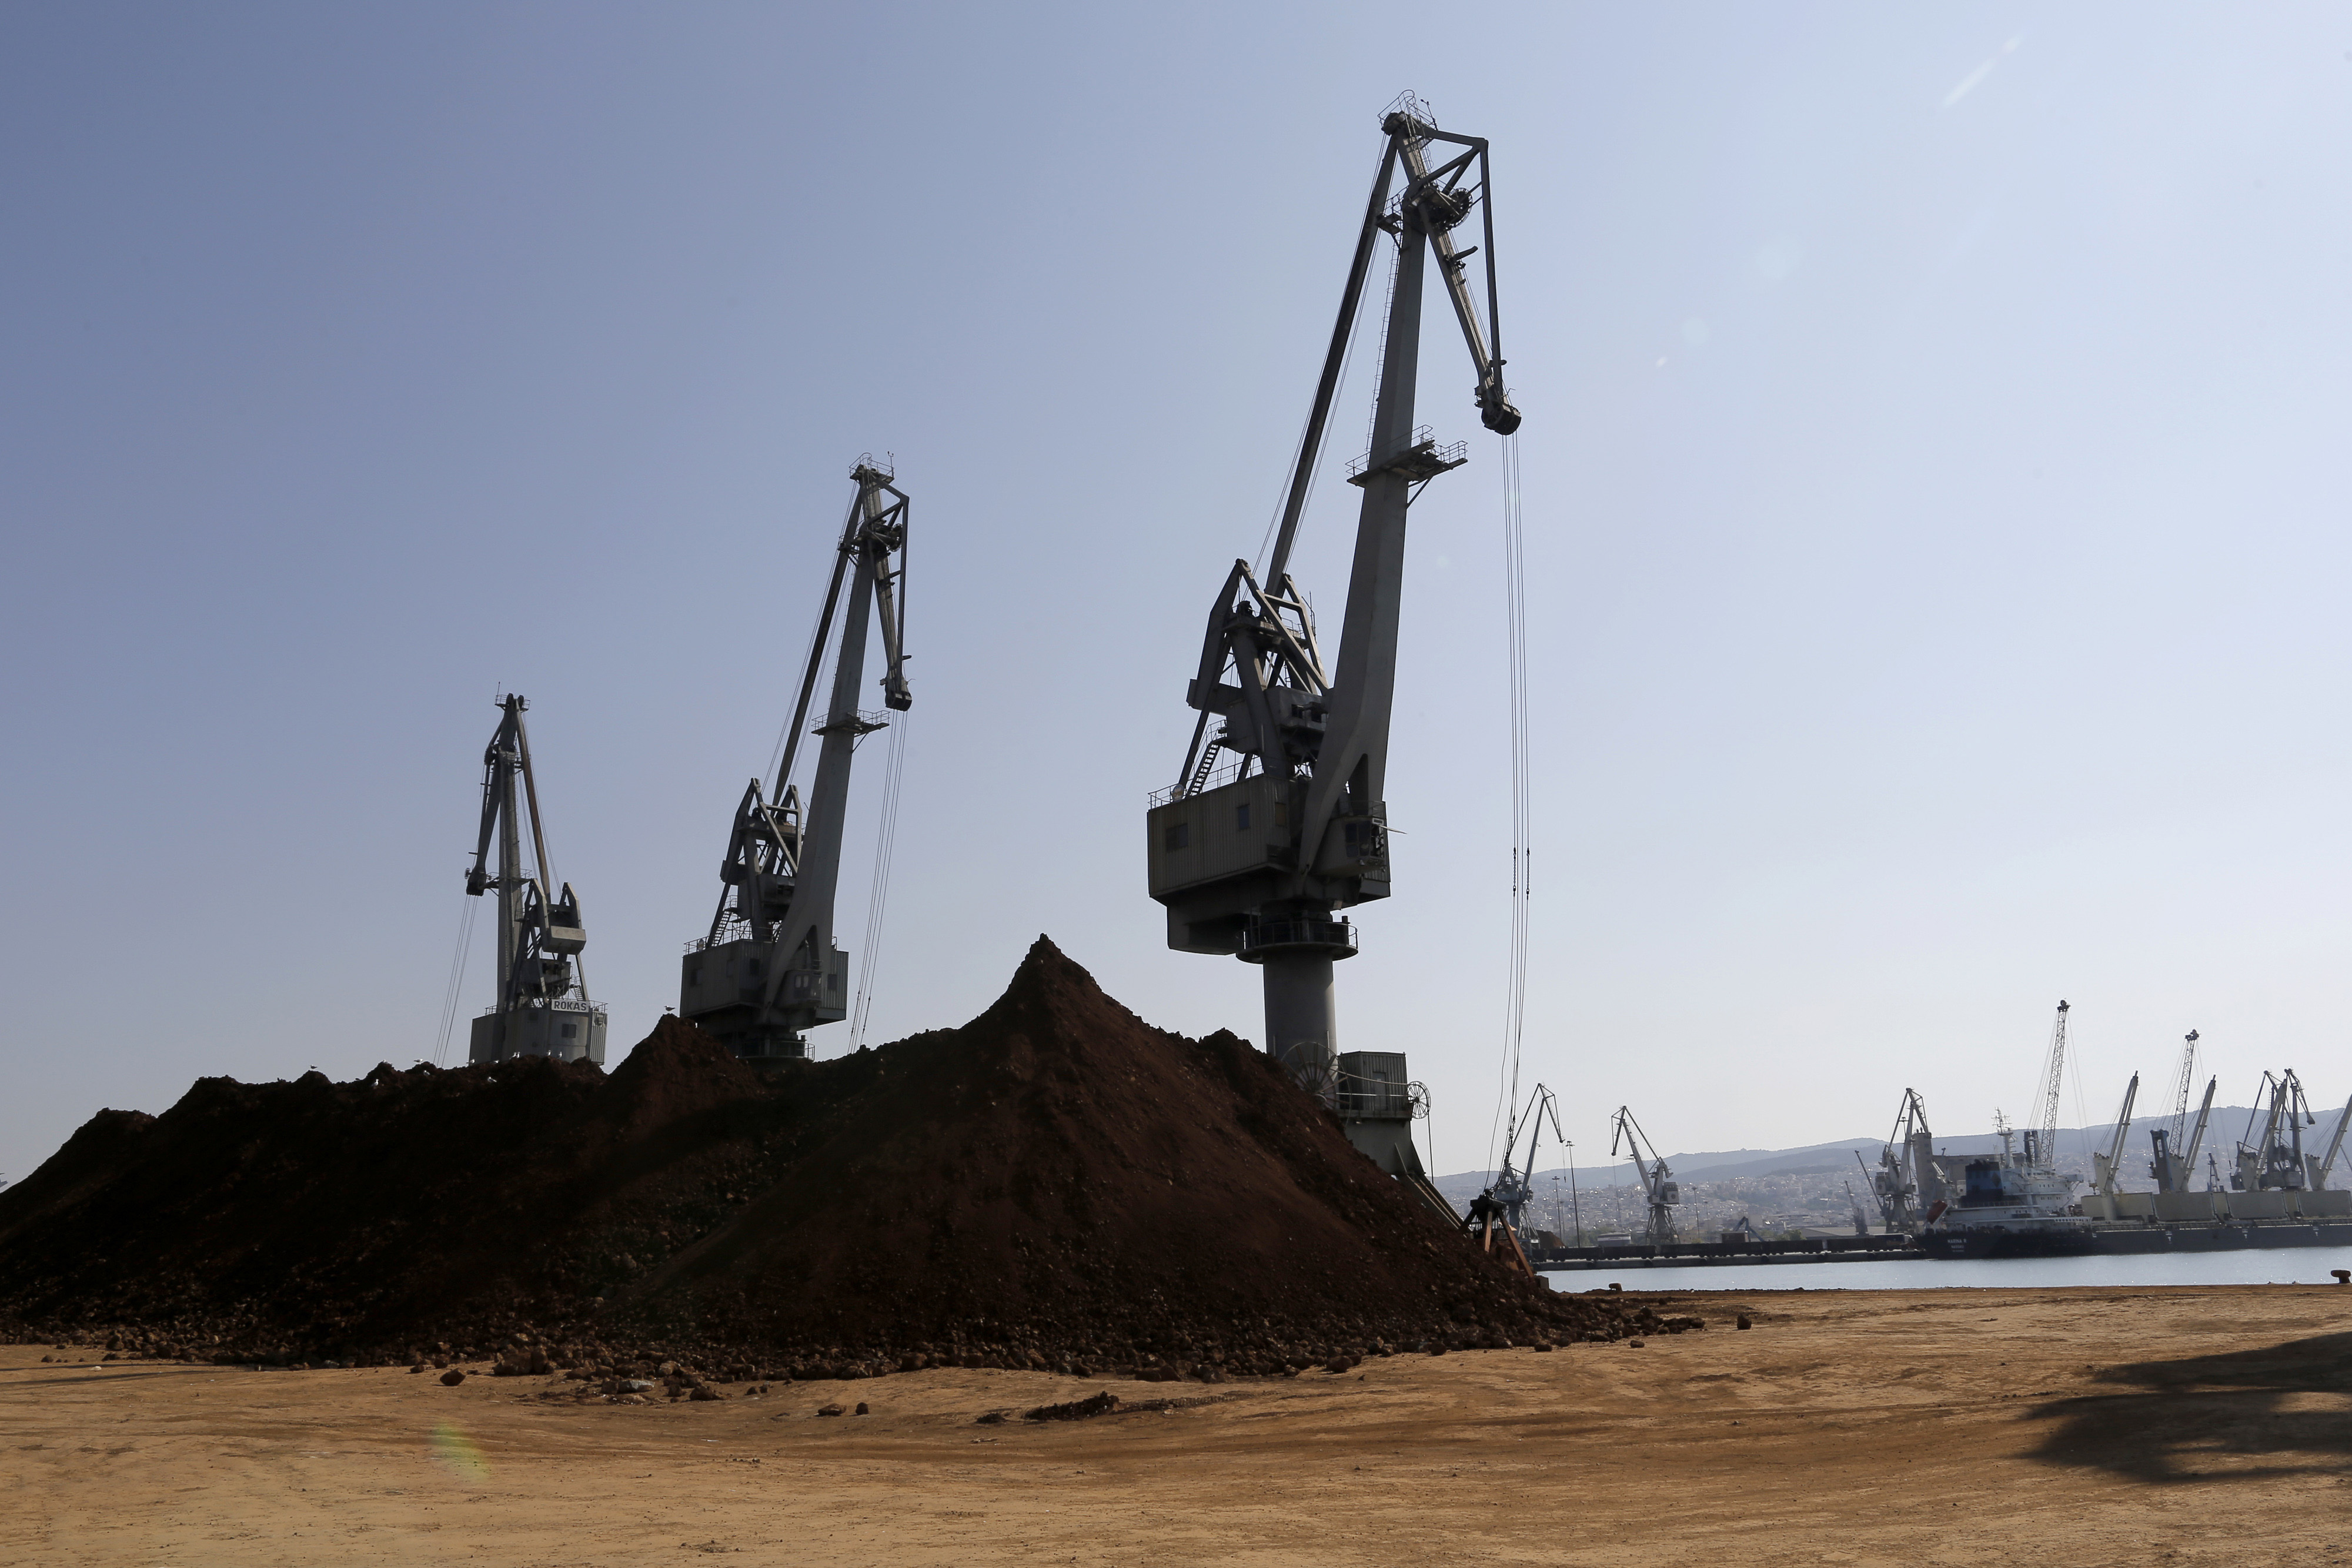 Shipping cranes stand next to supplies of unprocessed nickel ore on the dockside at Thessaloniki port.